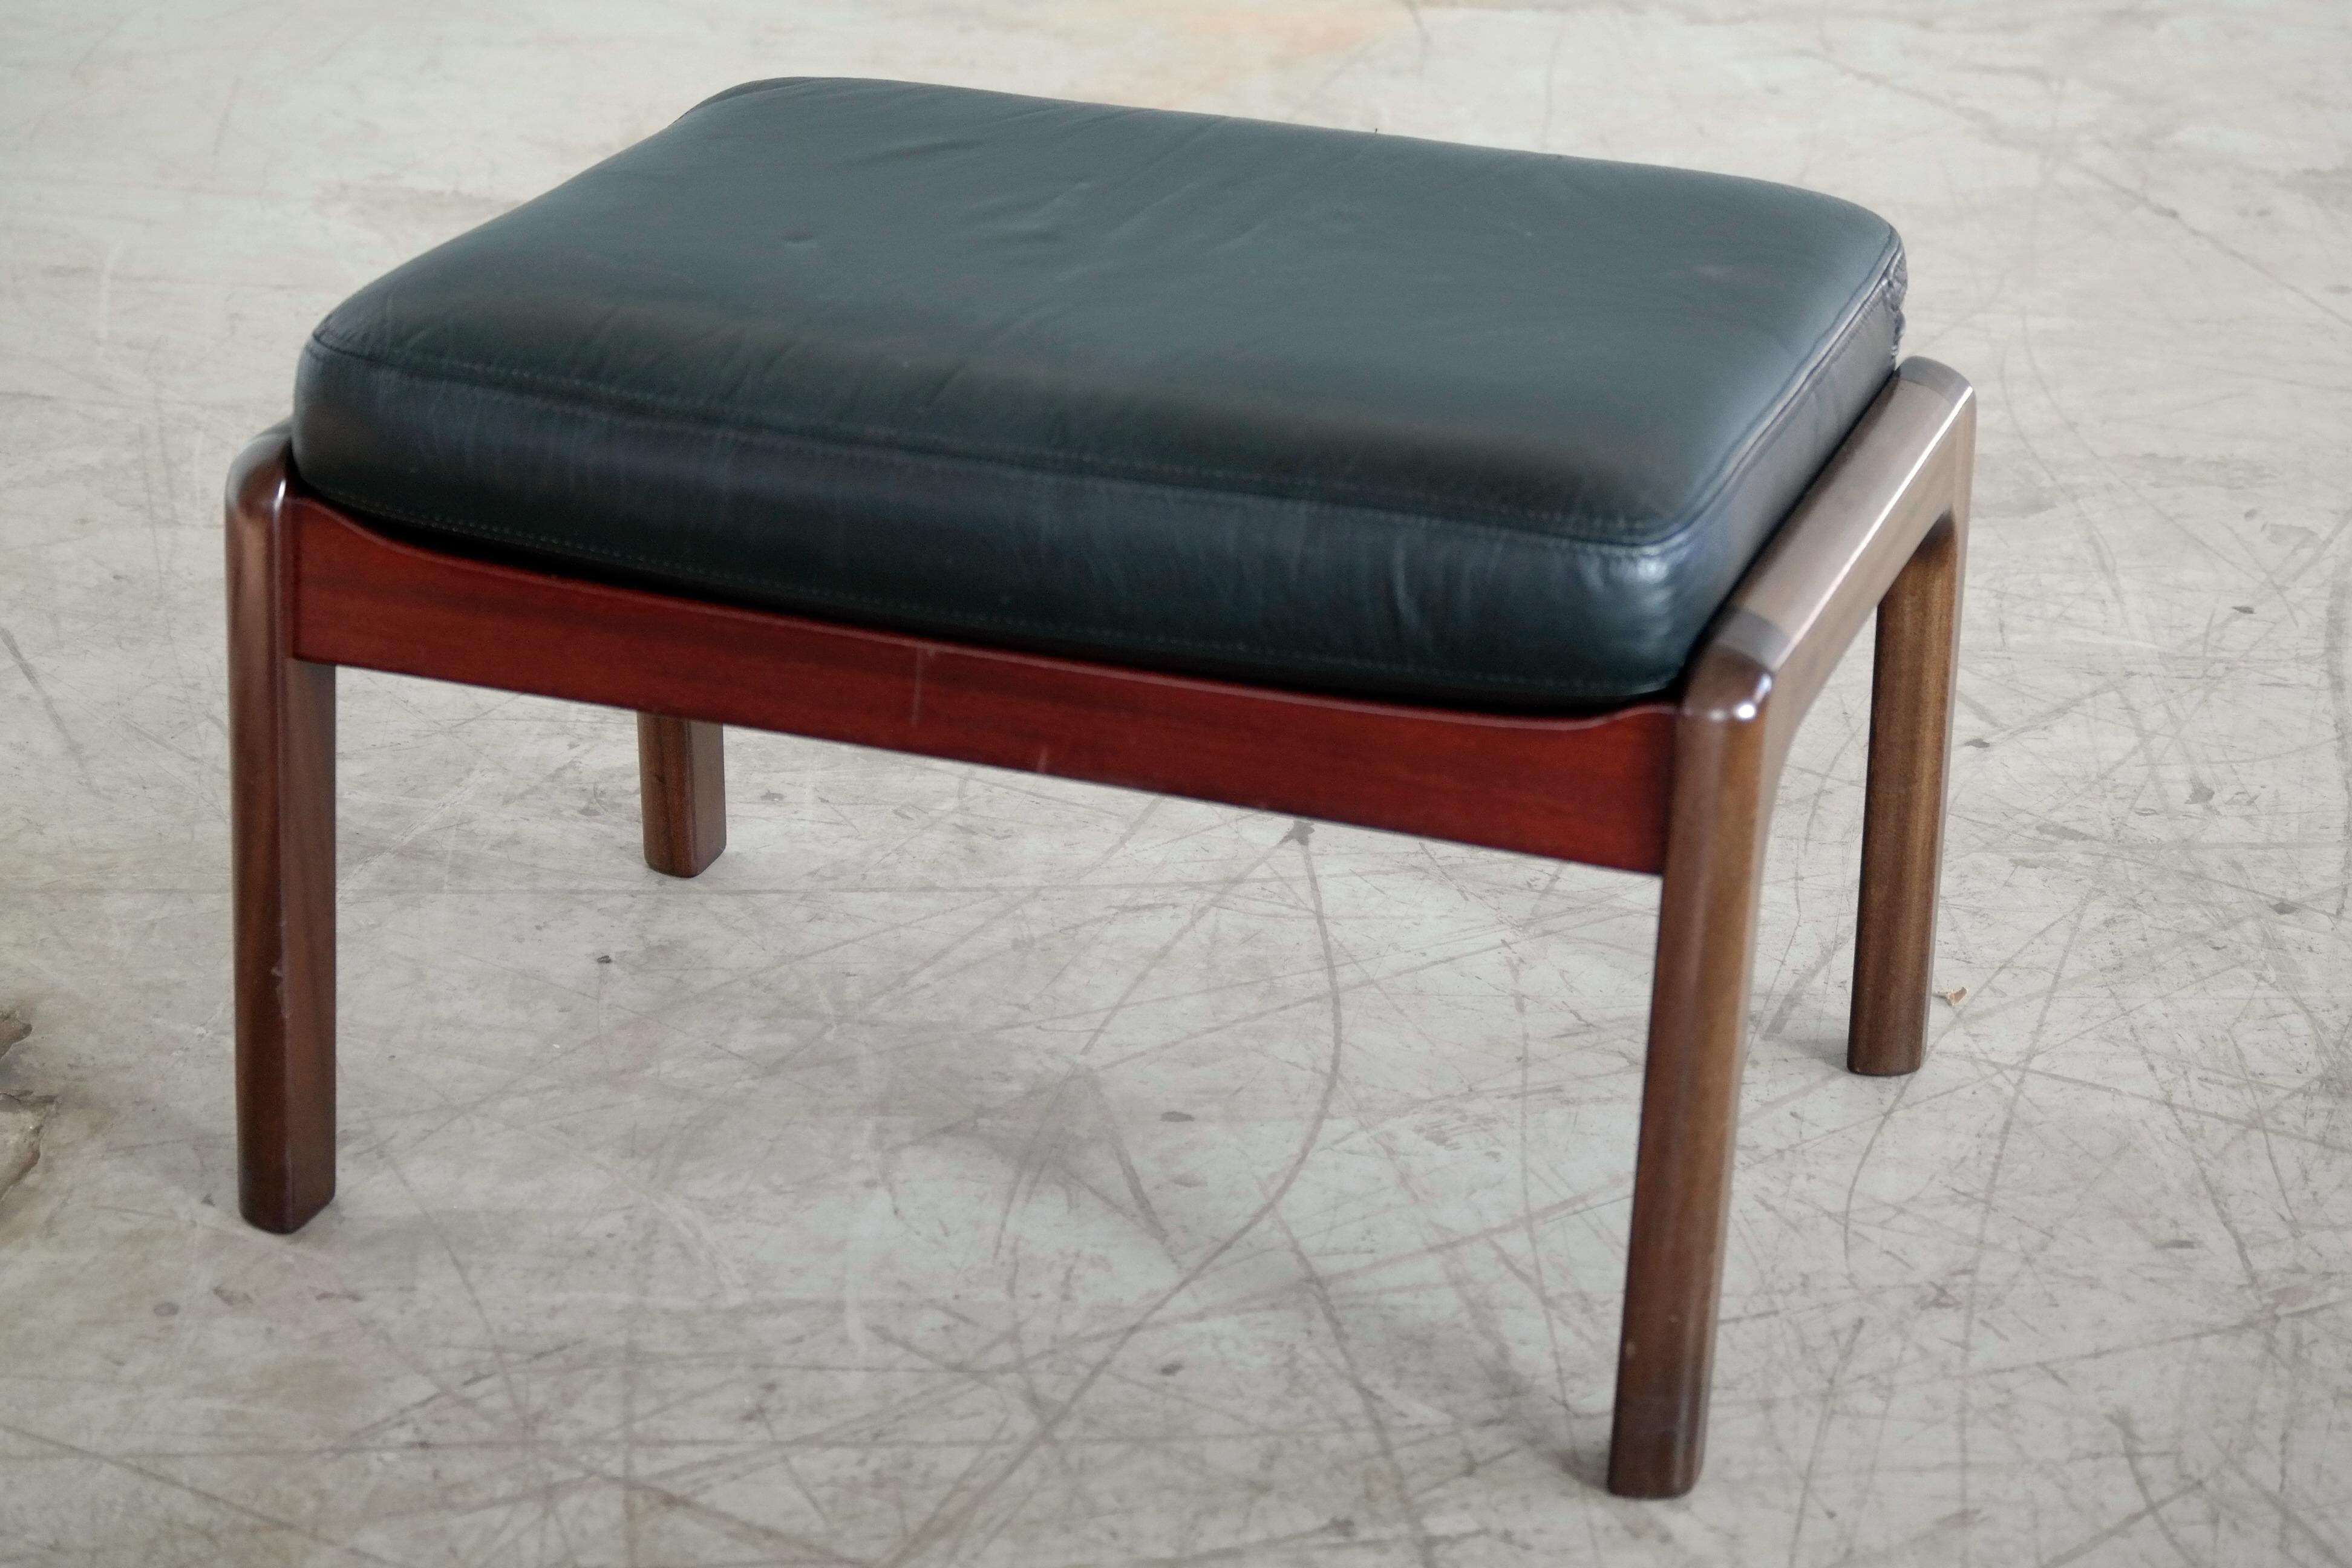 Scandinavian Modern Midcentury Danish Ottoman in Leather and Mahogany by Ole Wanscher